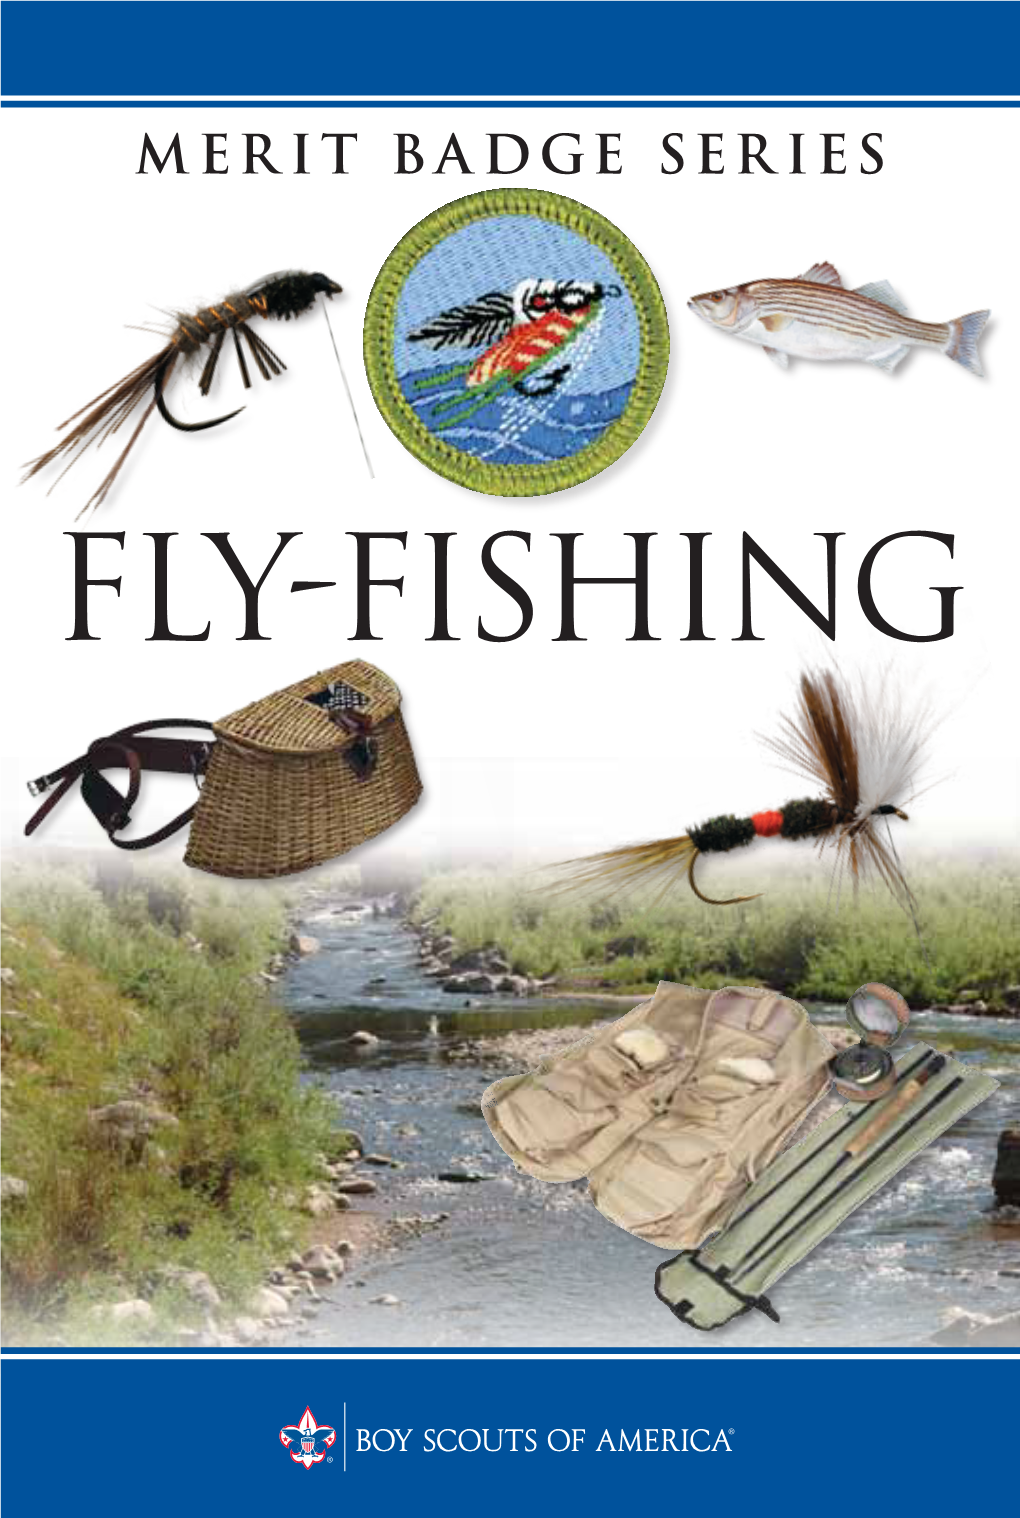 FLY-FISHING How to Use This Pamphlet the Secret to Successfully Earning a Merit Badge Is for You to Use Both the Pamphlet and the Suggestions of Your Counselor